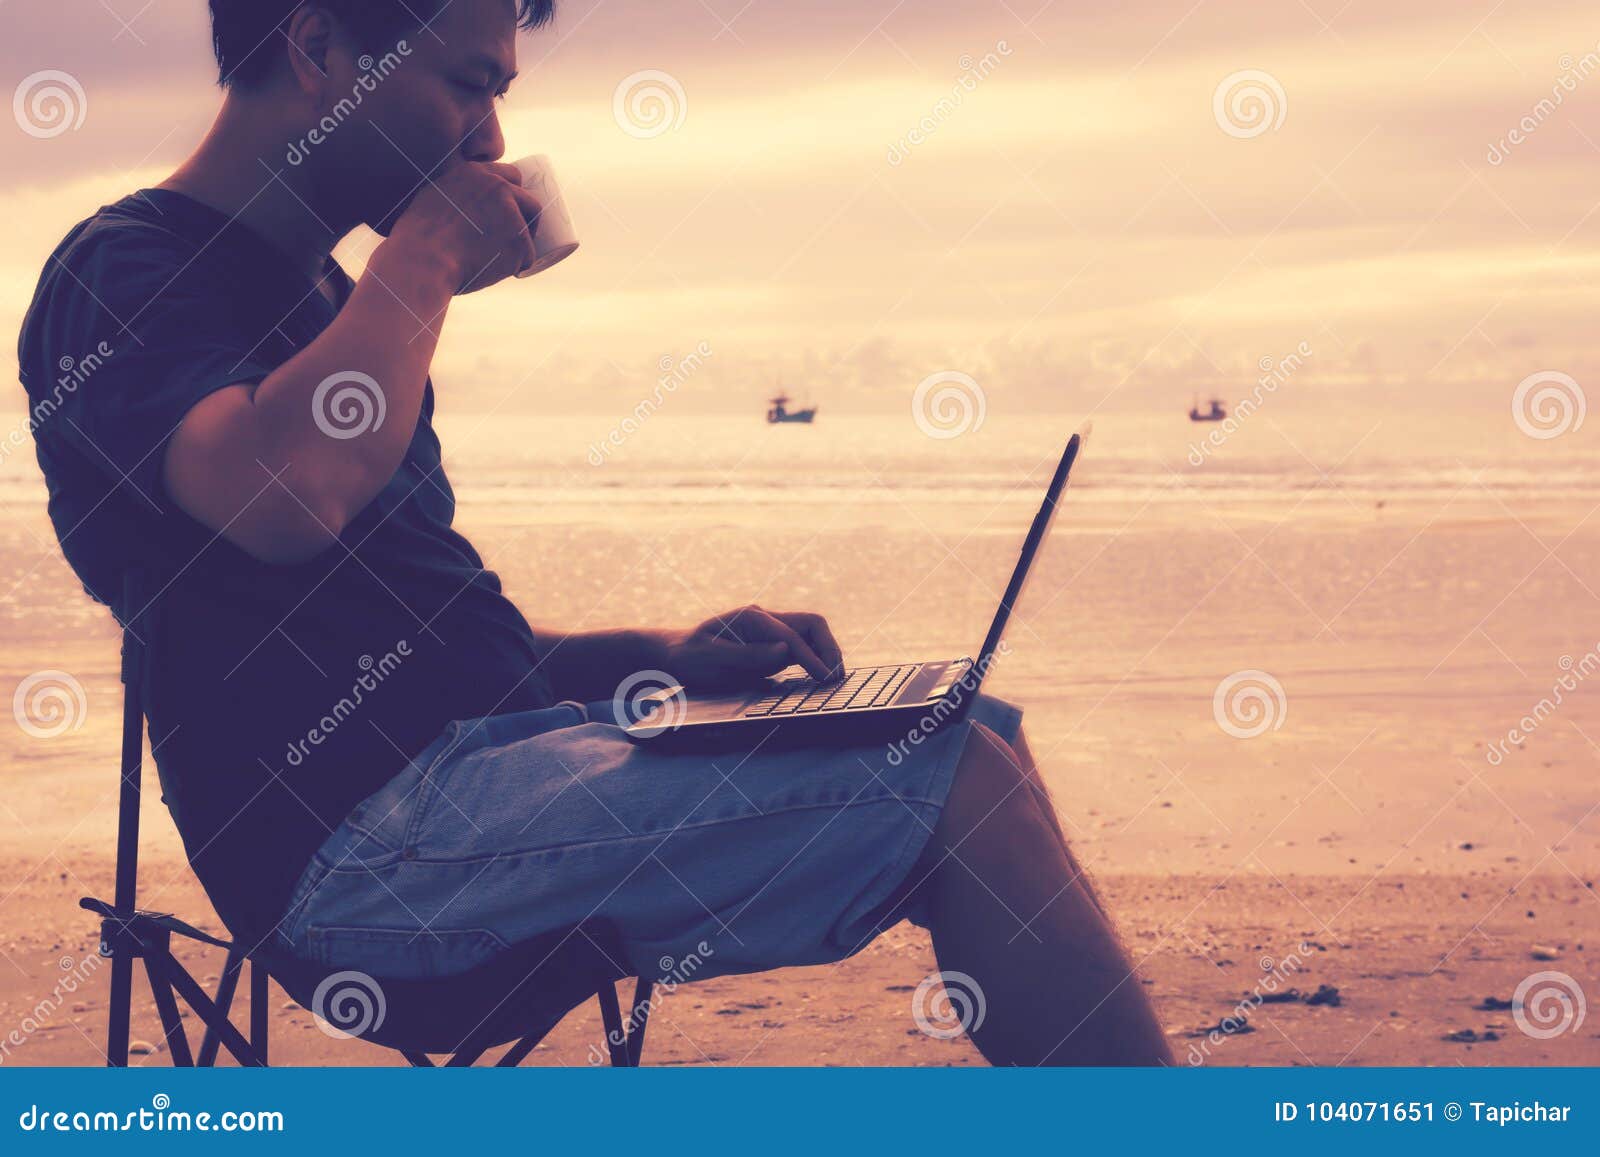 A Man Relaxing on the Beach Stock Image - Image of shadow, style: 104071651